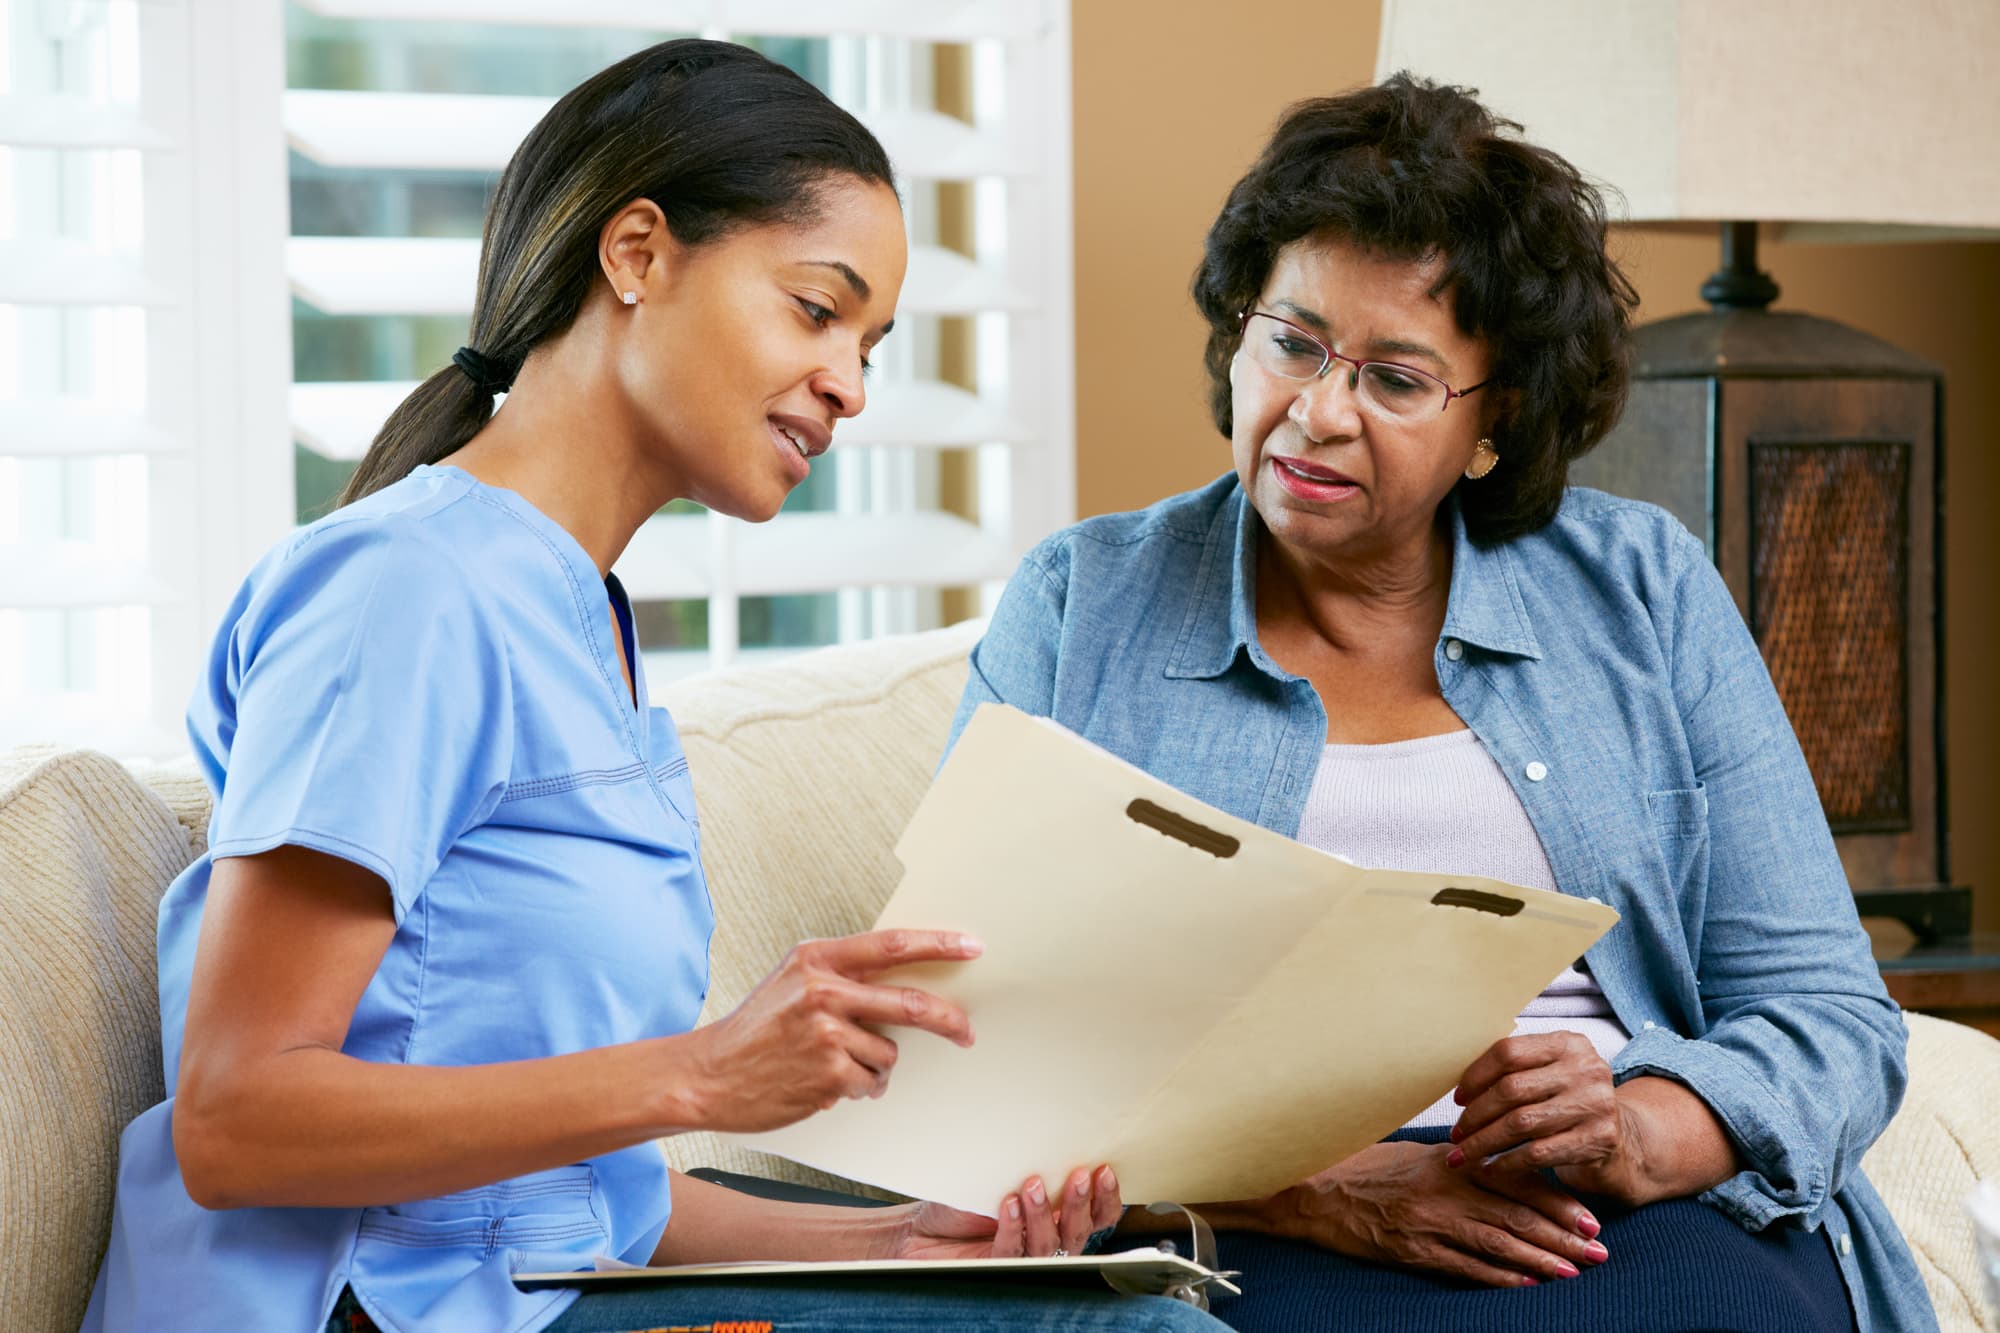 Home care provider Discussing Records With Senior Female Patient During Home Visit